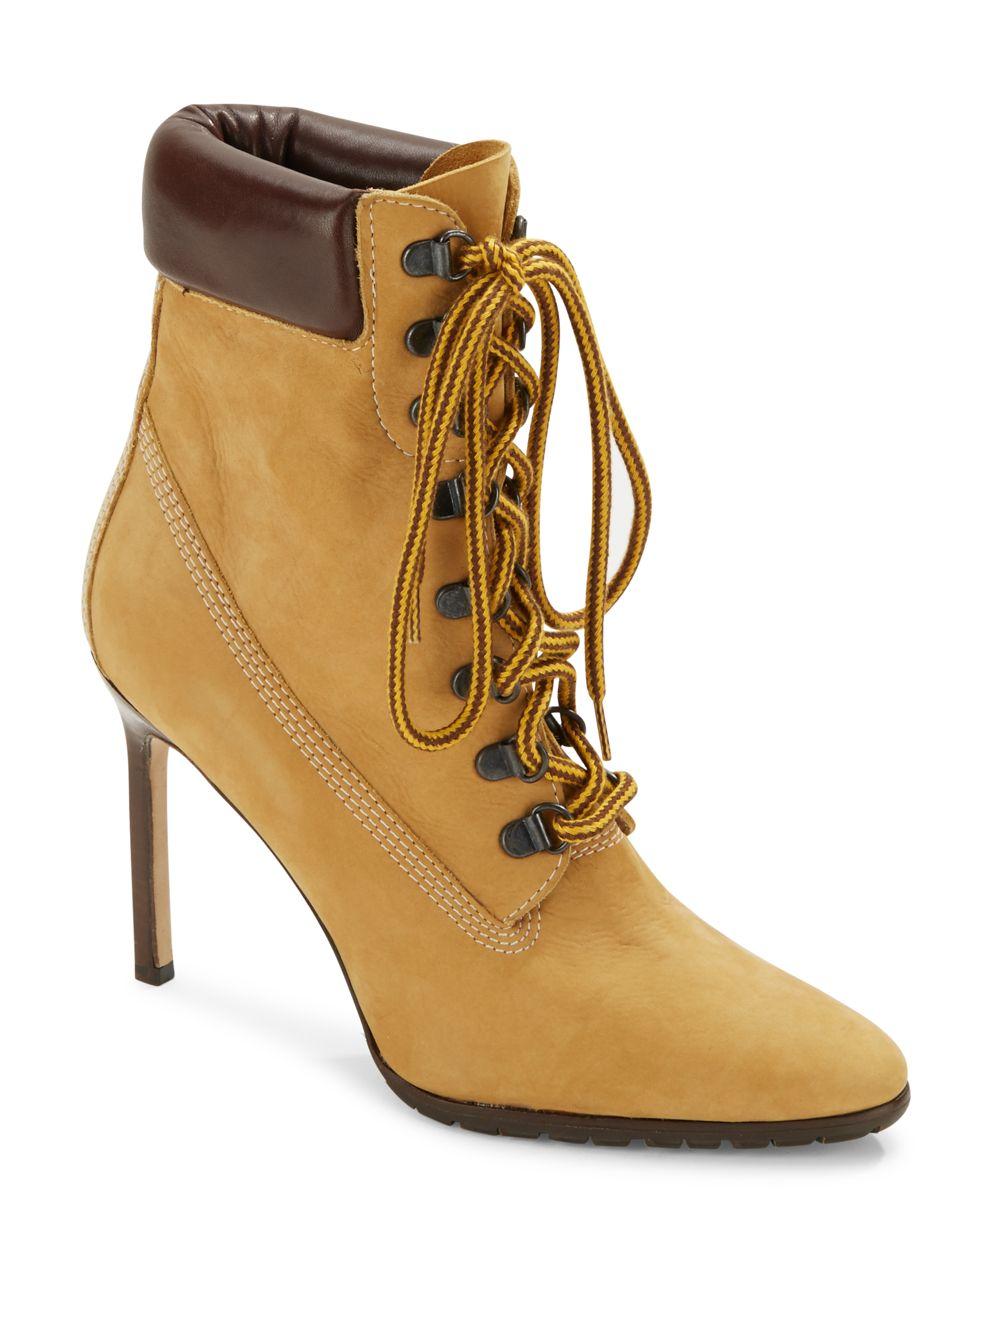 Manolo Blahnik Oklamod Suede Cuffed Timberland Booties in Natural | Lyst